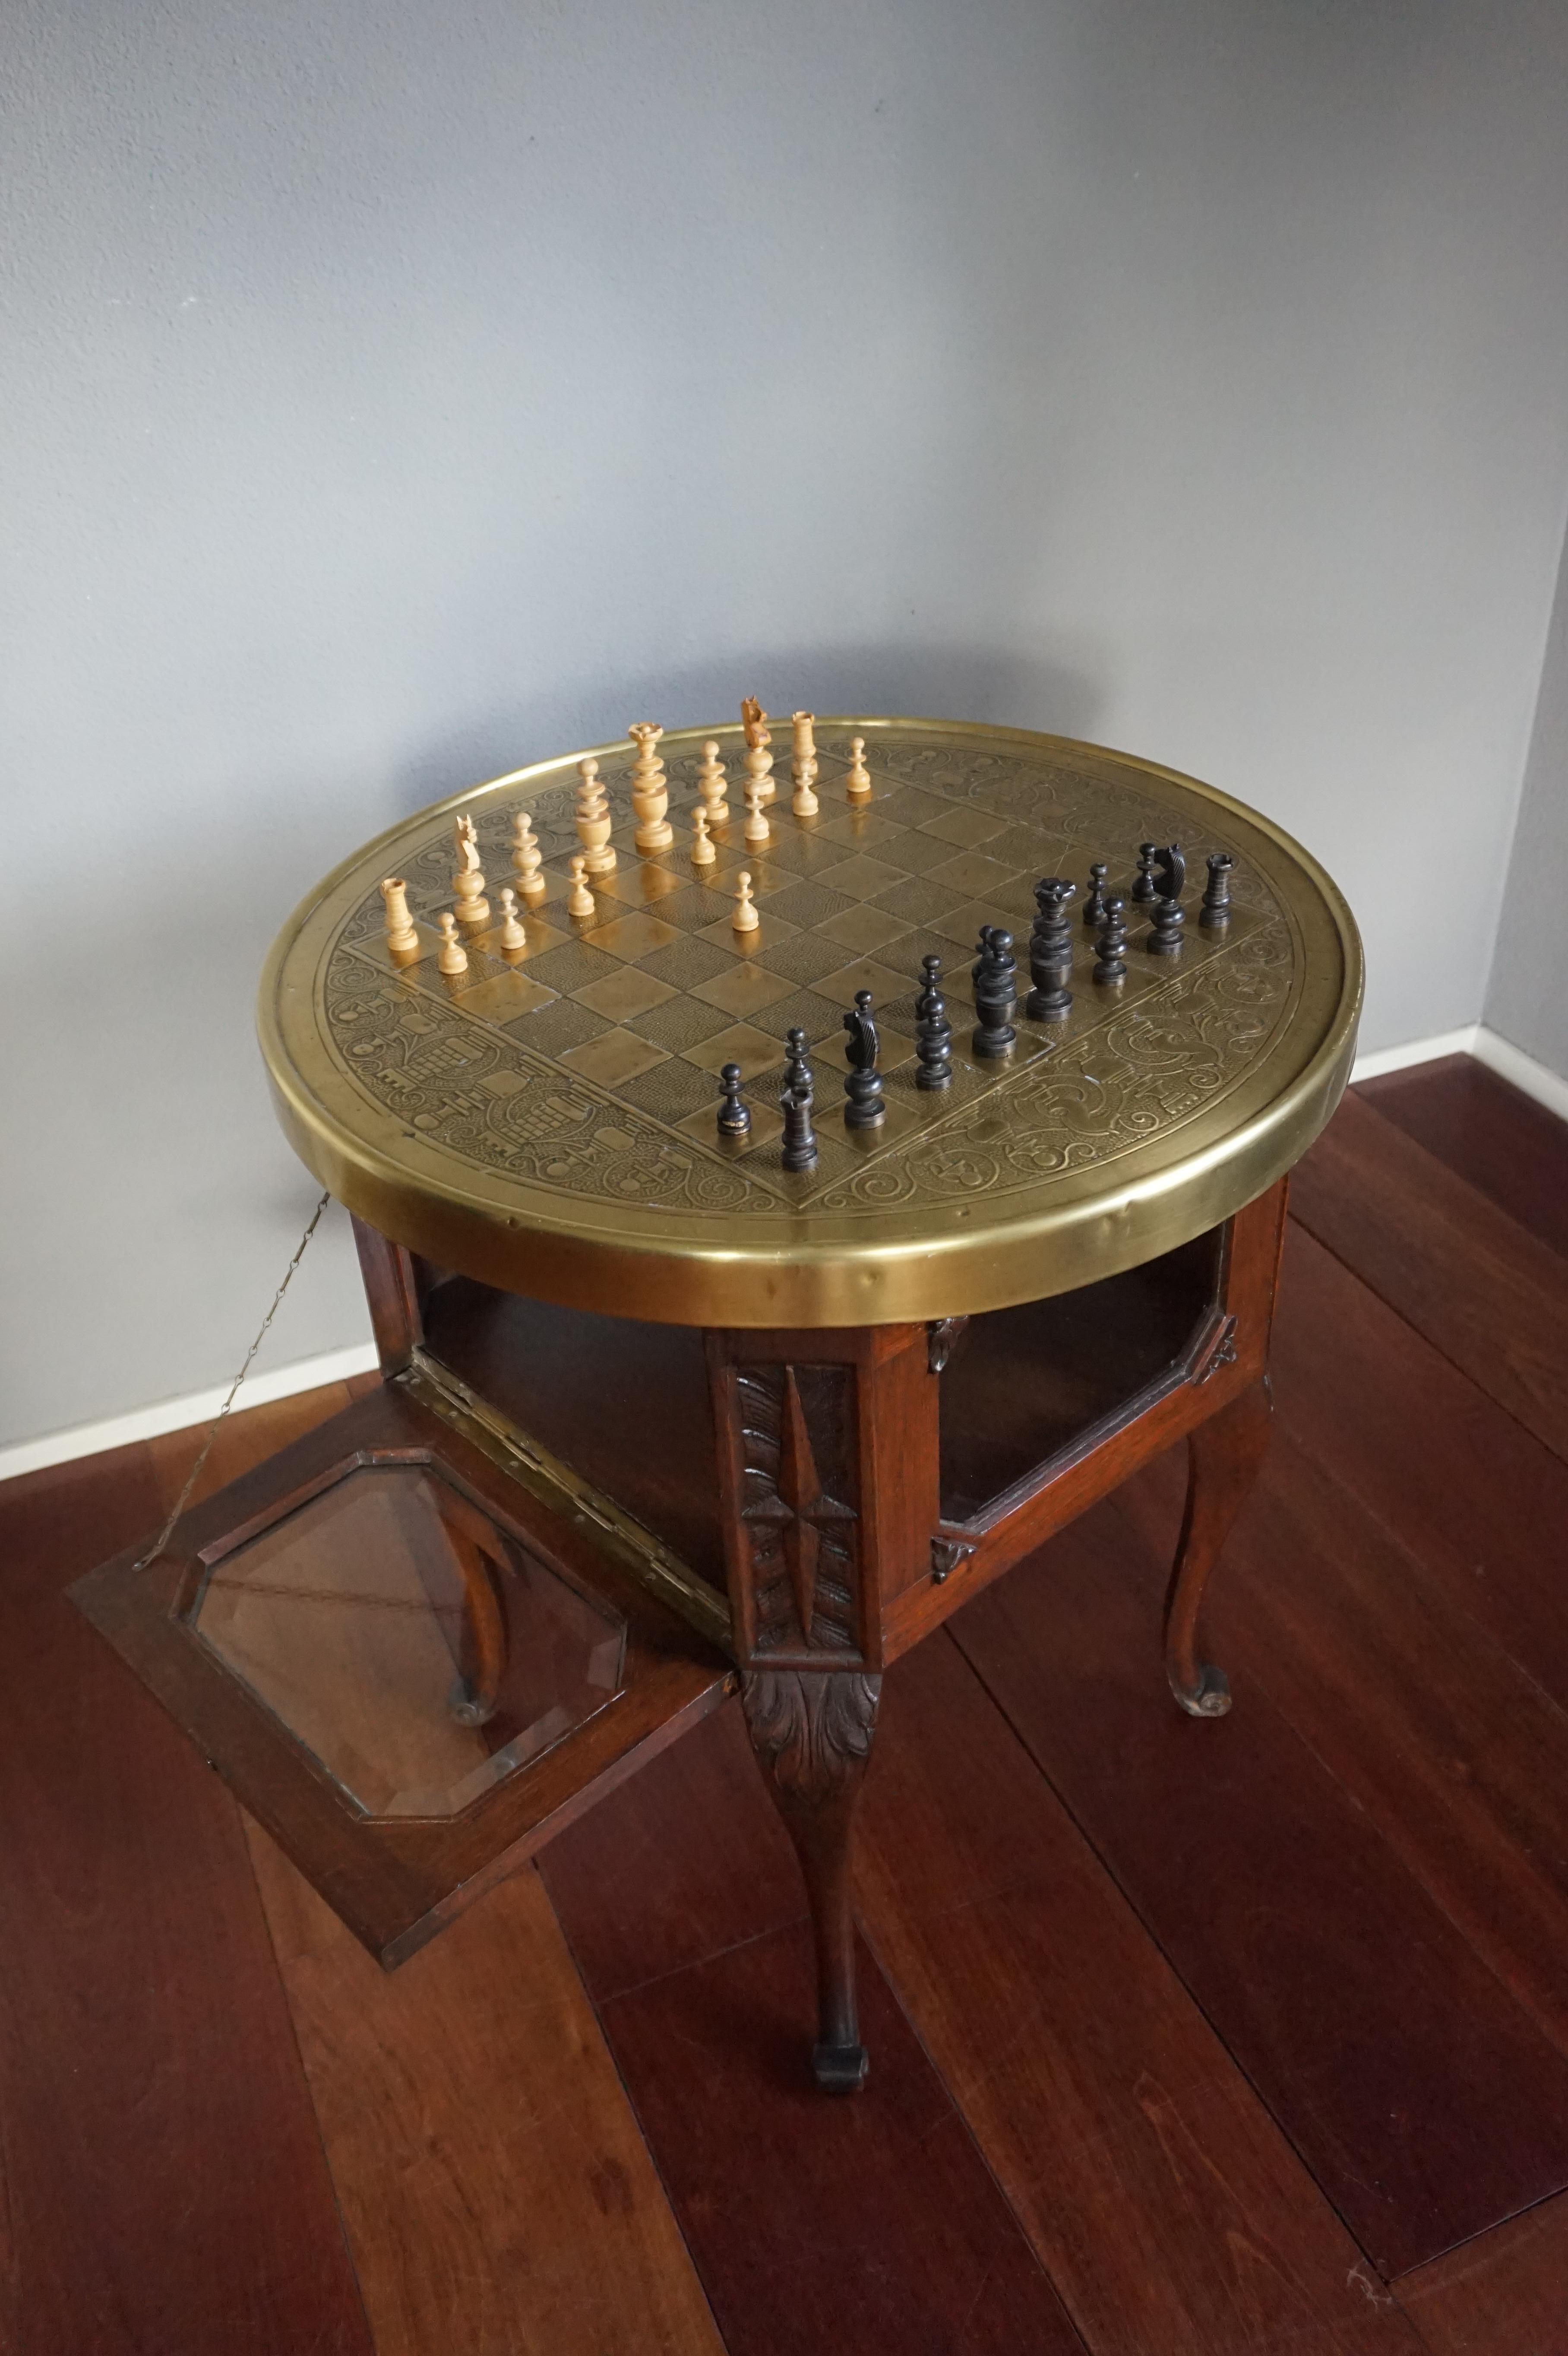 chess board display case